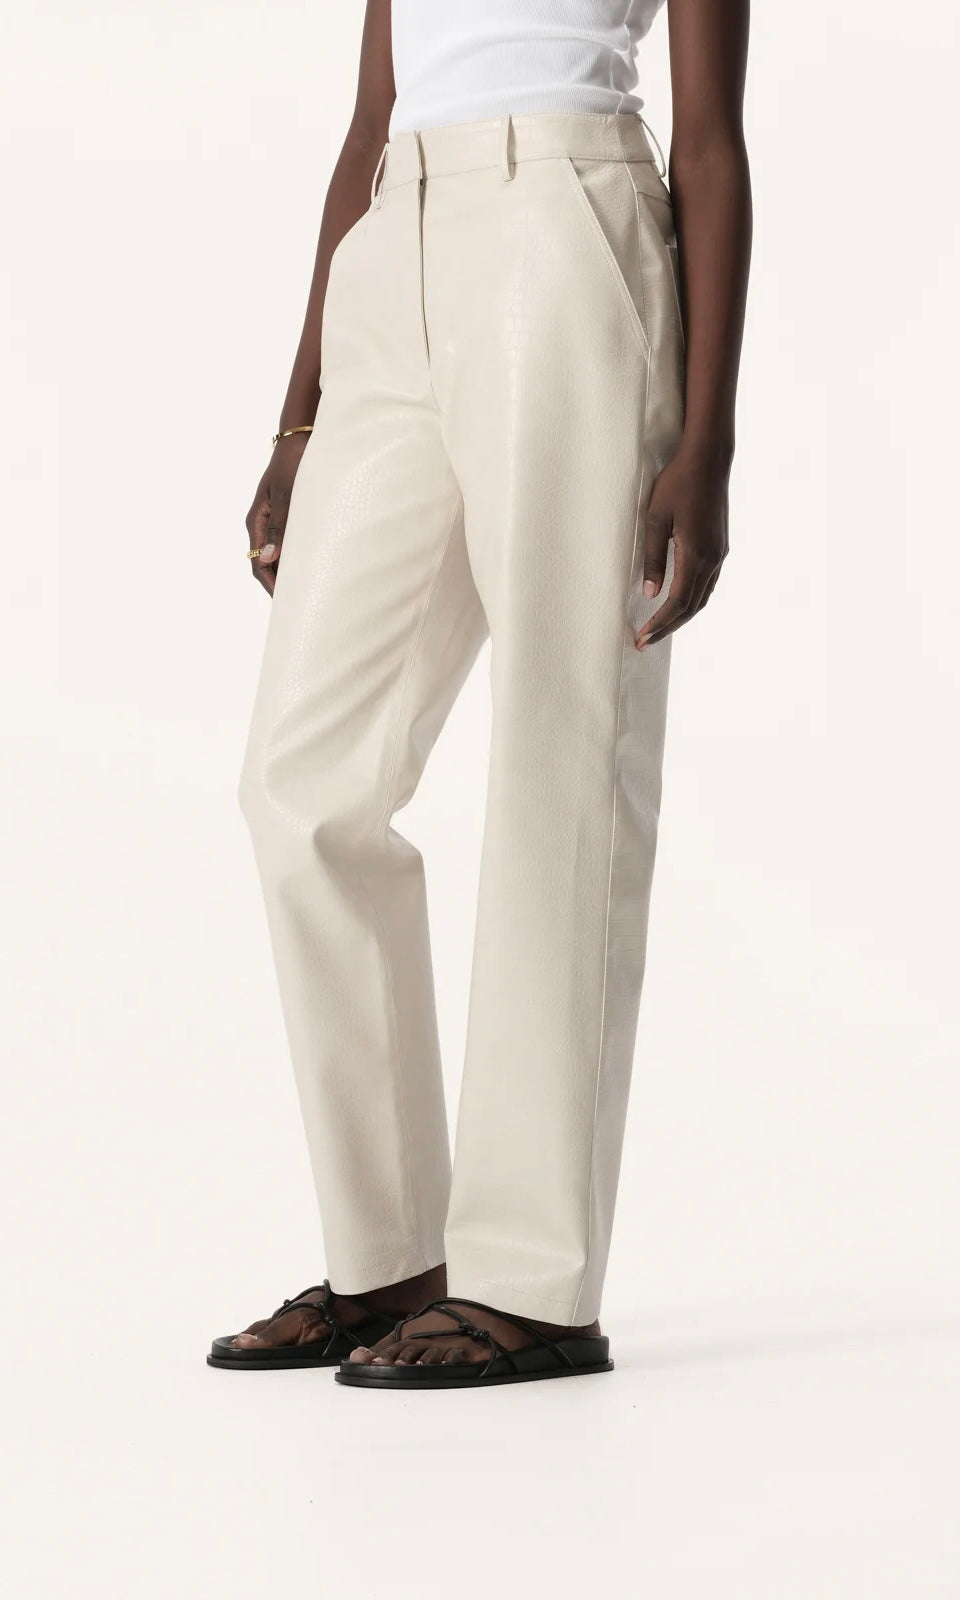 Elka Collective Clements Pant In Ivory Croc